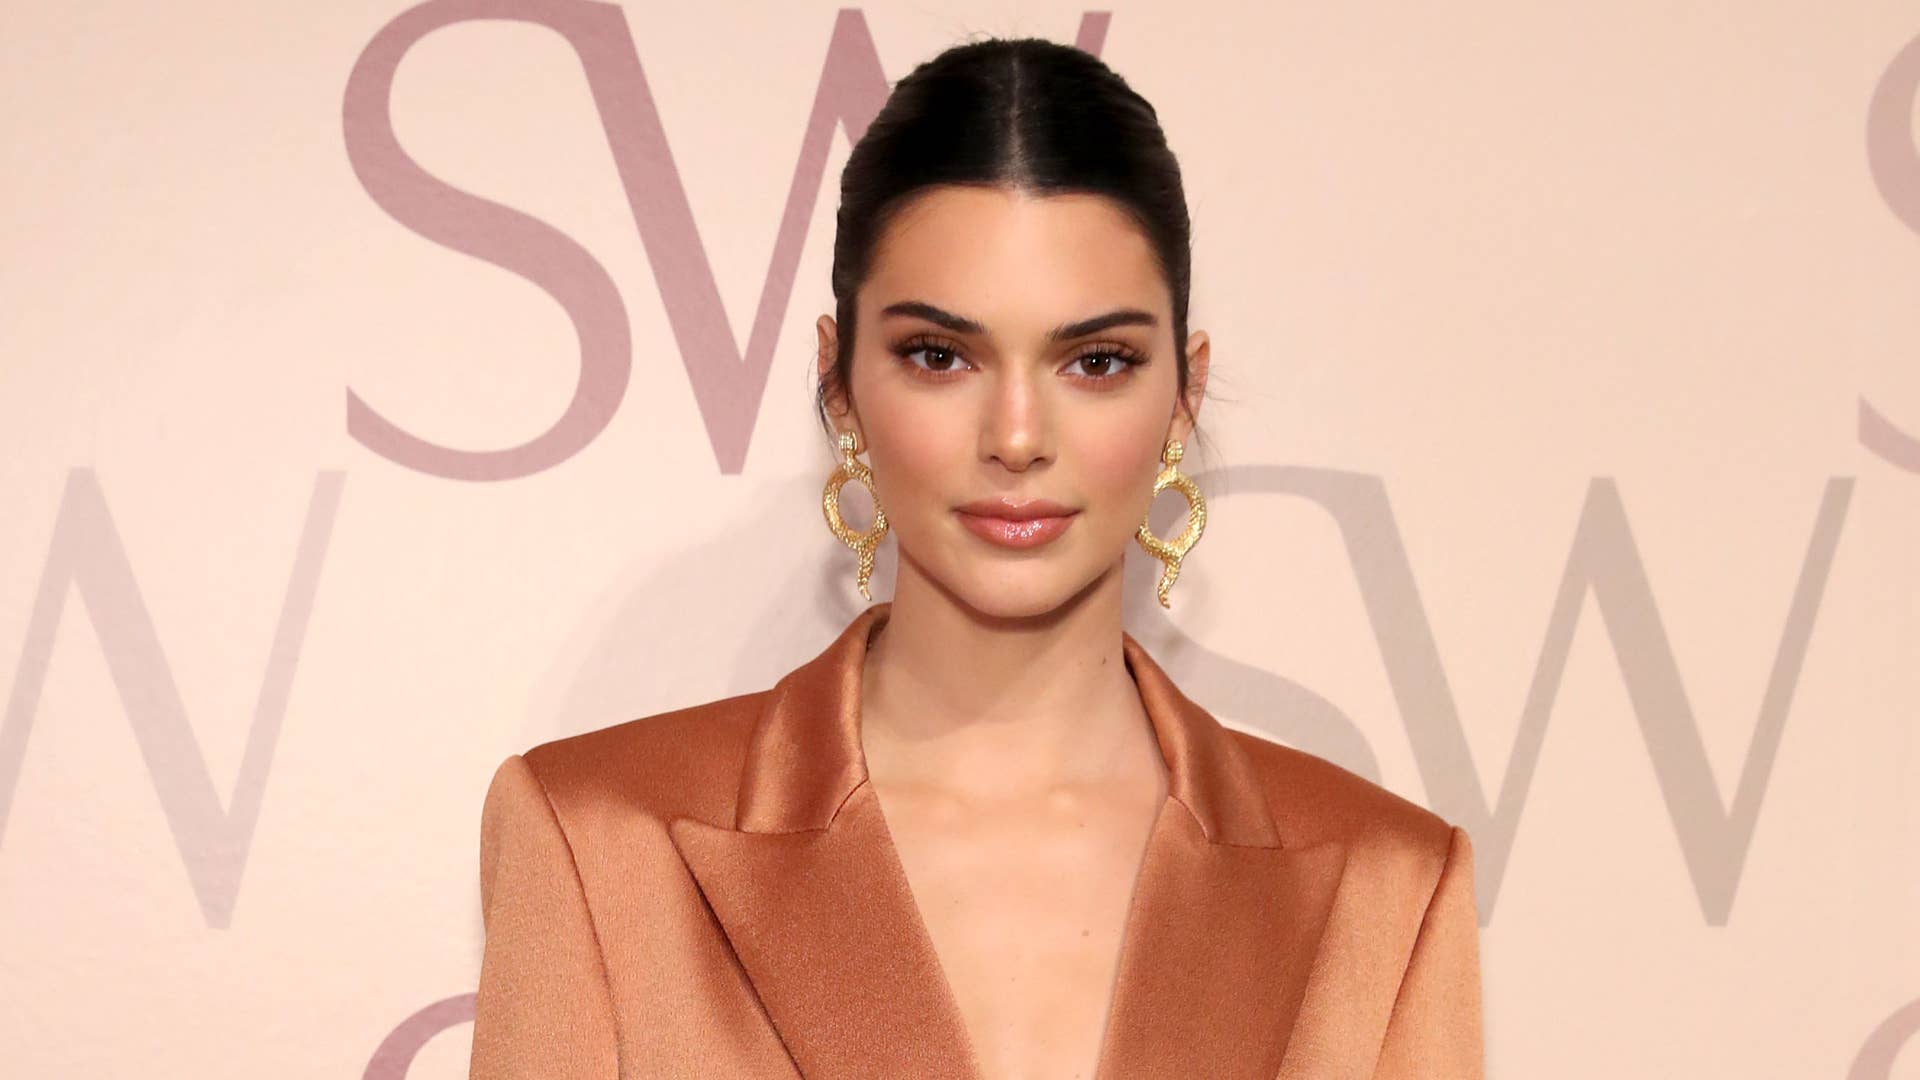 Kendall Jenner poses for photos at a fashion show.